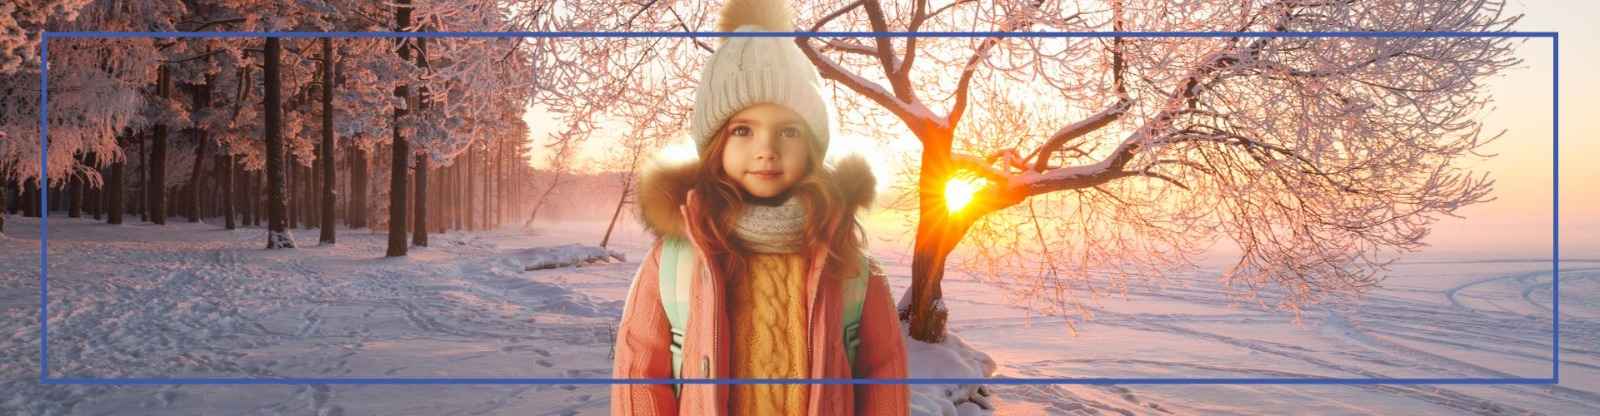 How to Get Vitamin D for Kids in Winter?